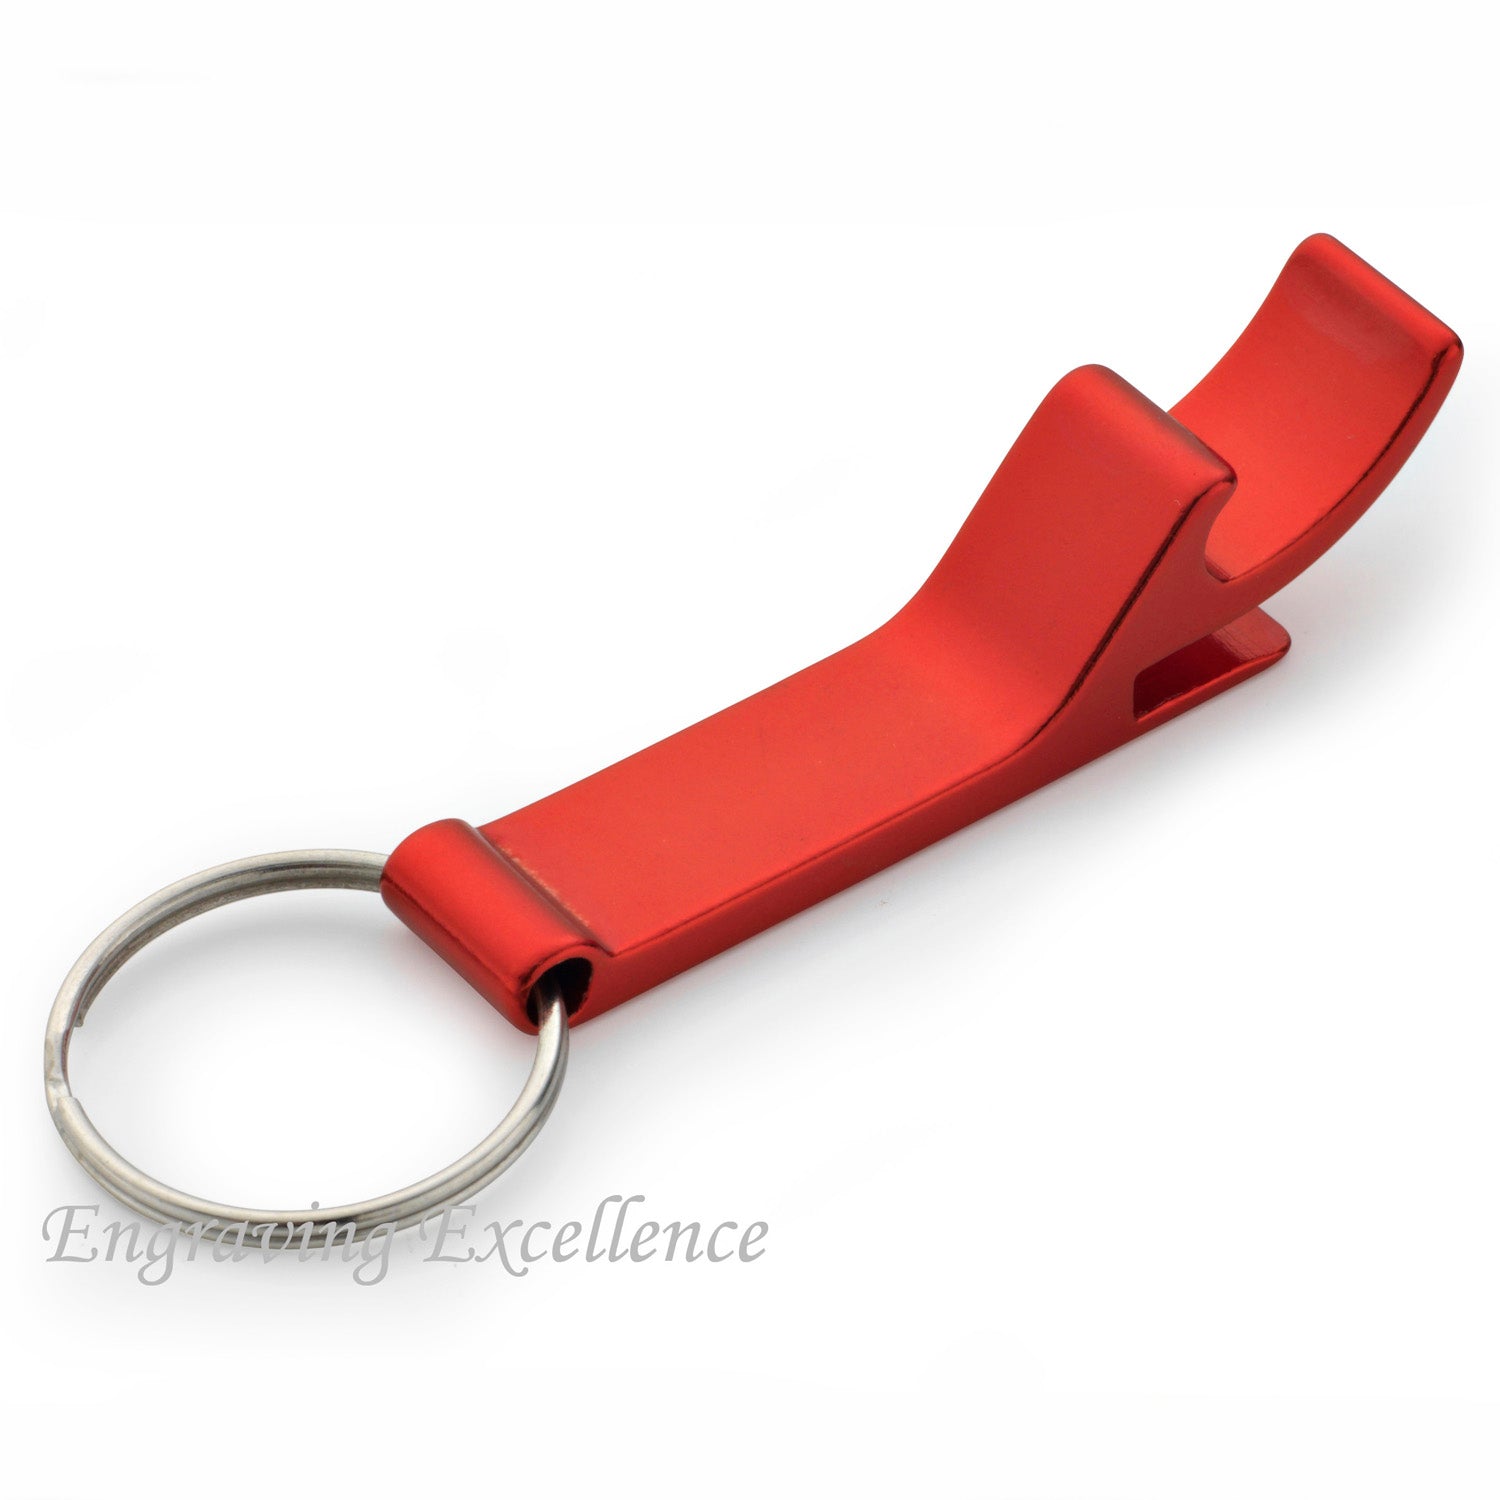 Mini Red Bottle Opener – Engraving Excellence